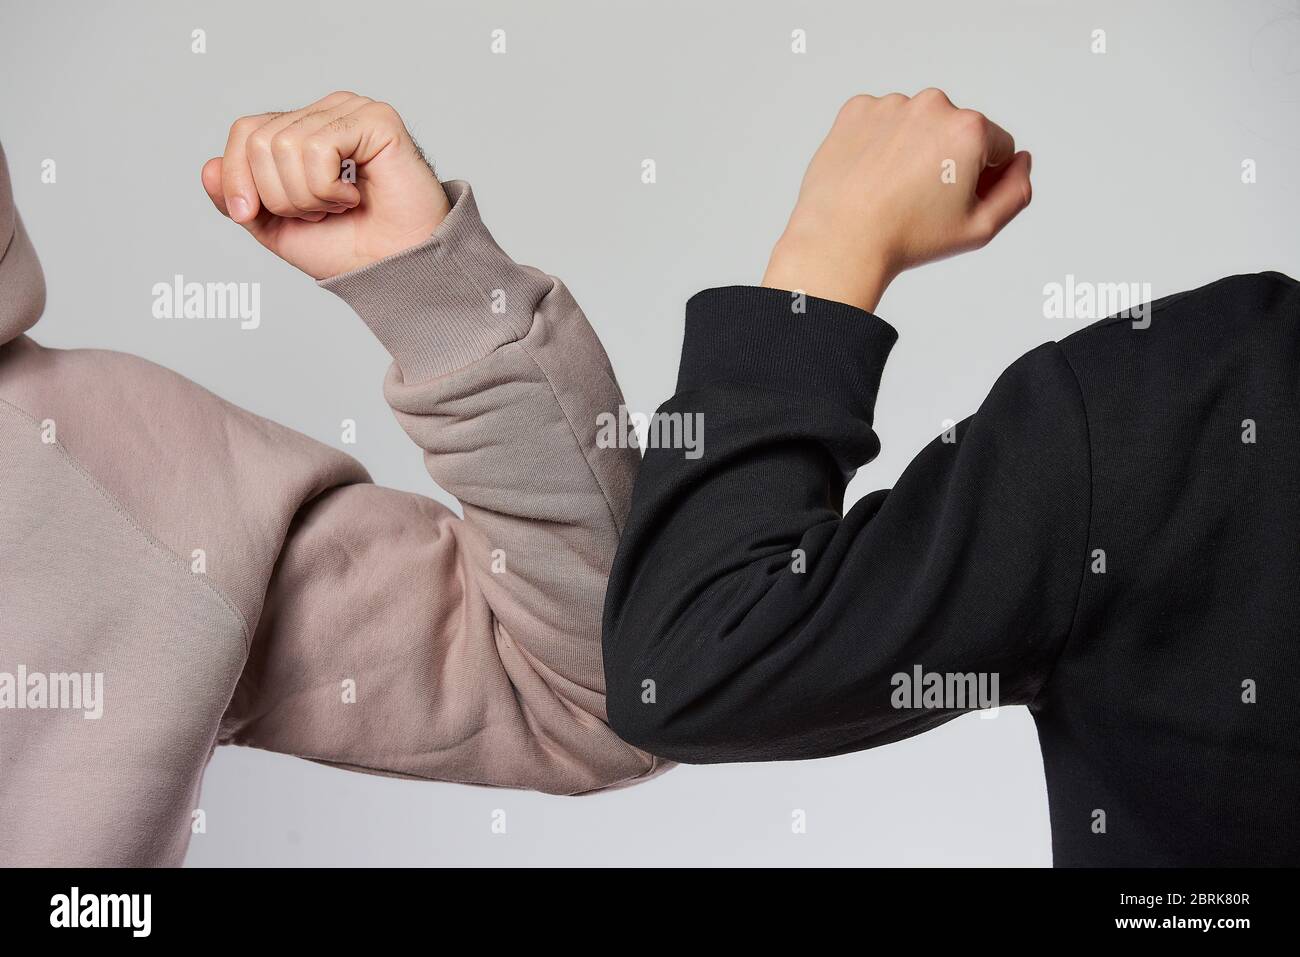 A new way of greeting to avoid the spread of coronavirus. A boy and a girl in sweatshirts bump elbows Instead of greeting with a hug or handshake. Stock Photo